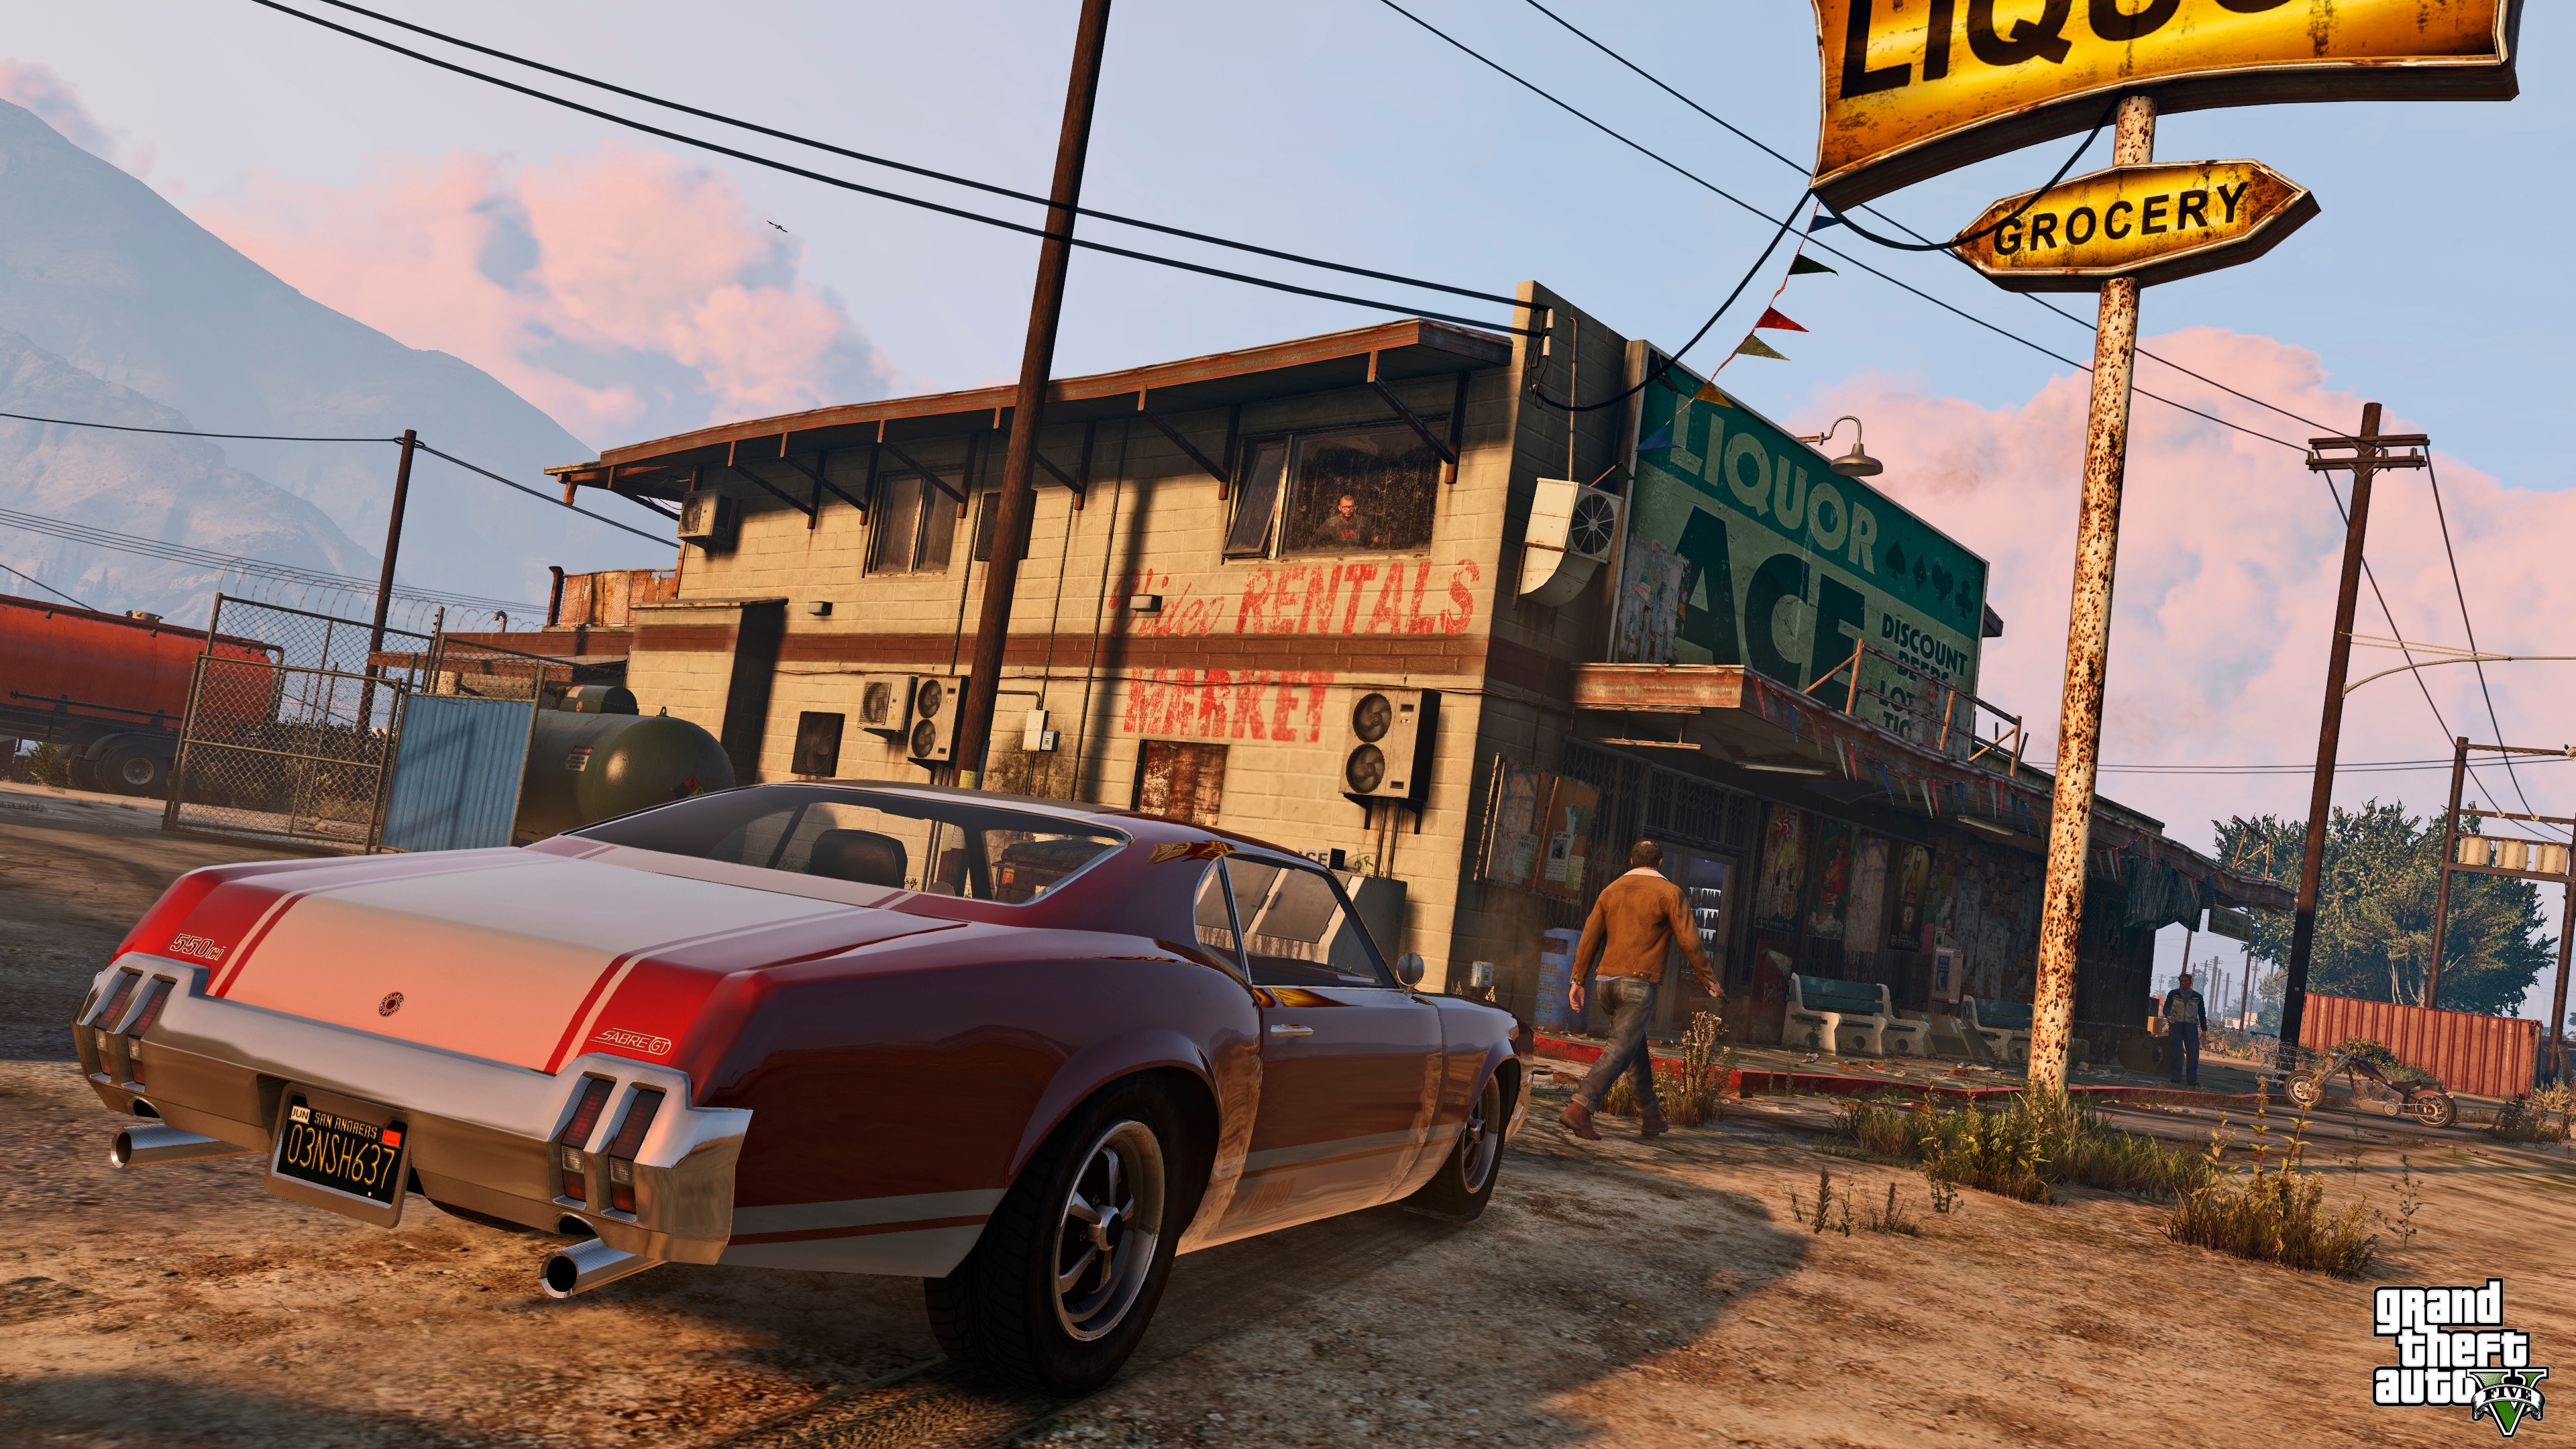 Alleged Grand Theft Auto 6 Gameplay Leaks, Could Be Legit - autoevolution